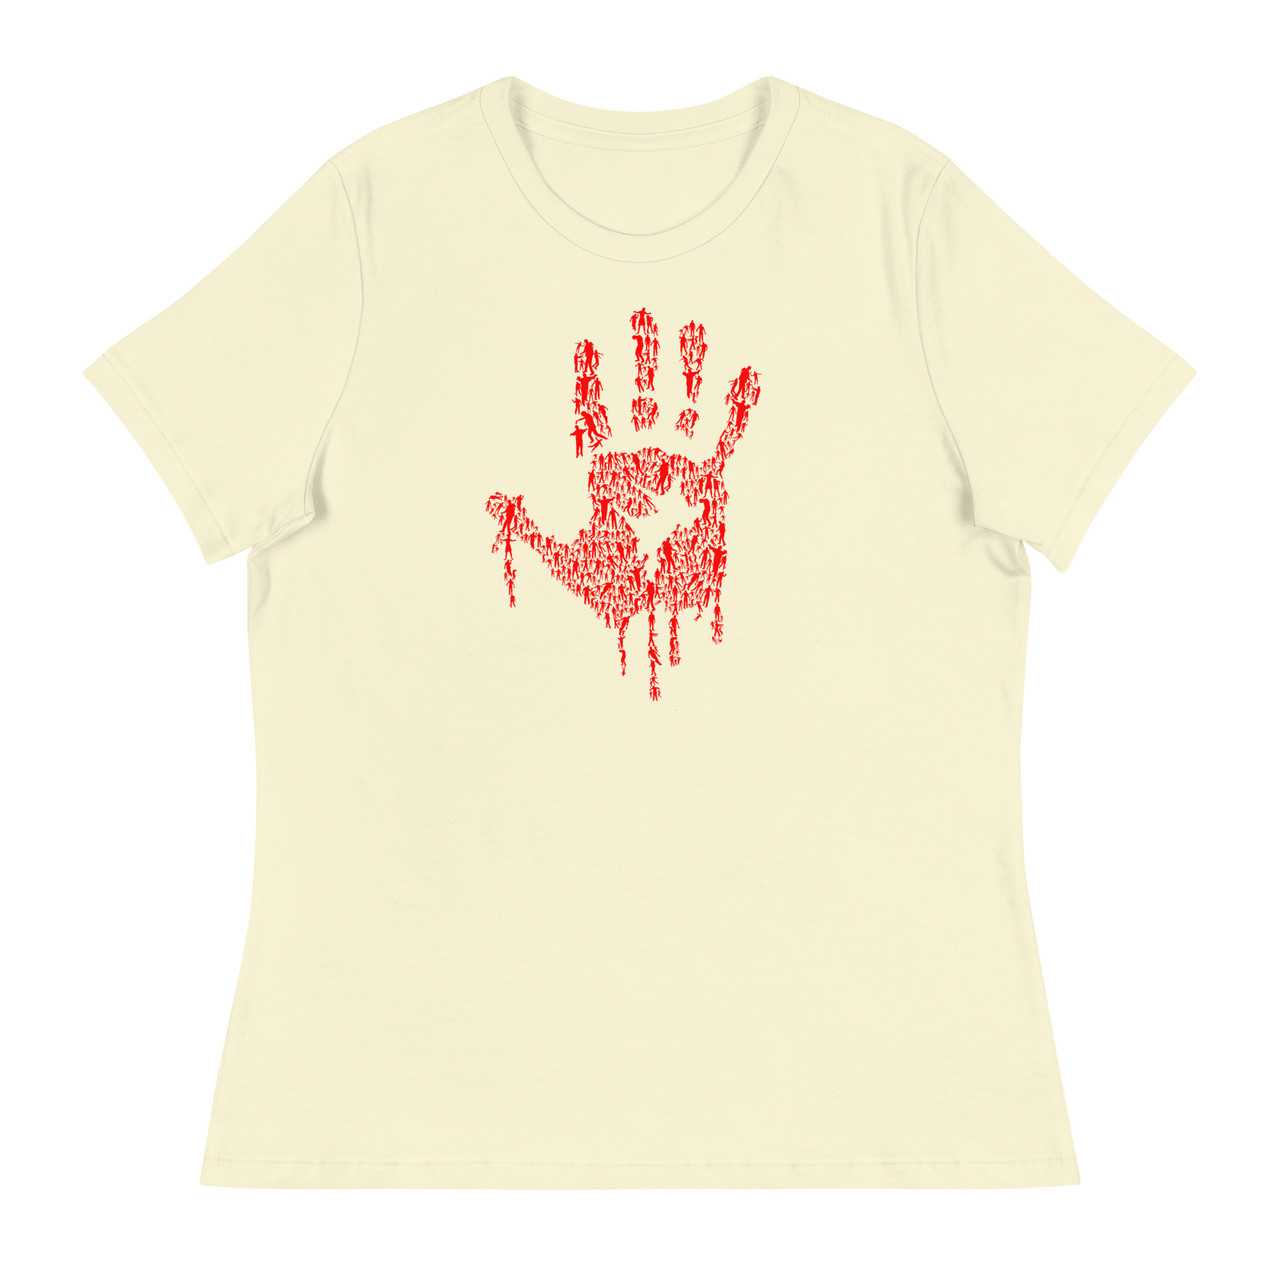 Hand Of Zombies Women's Relaxed T-Shirt - Bella + Canvas 6400 